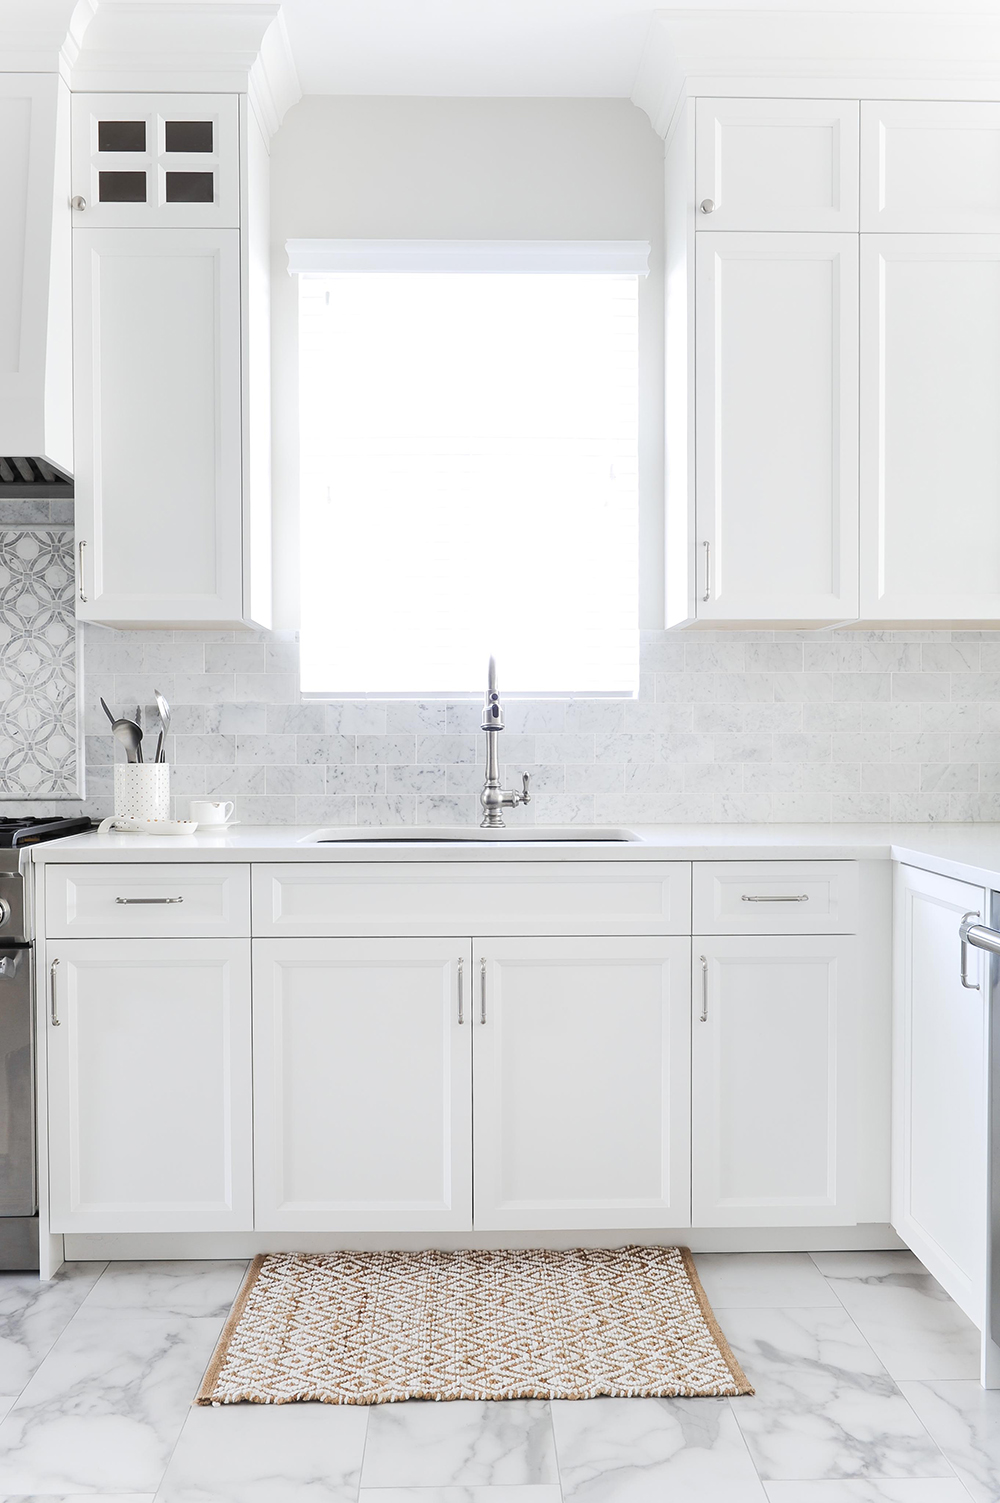 This custom kitchen cabinetry sports a classic Shaker silhouette.